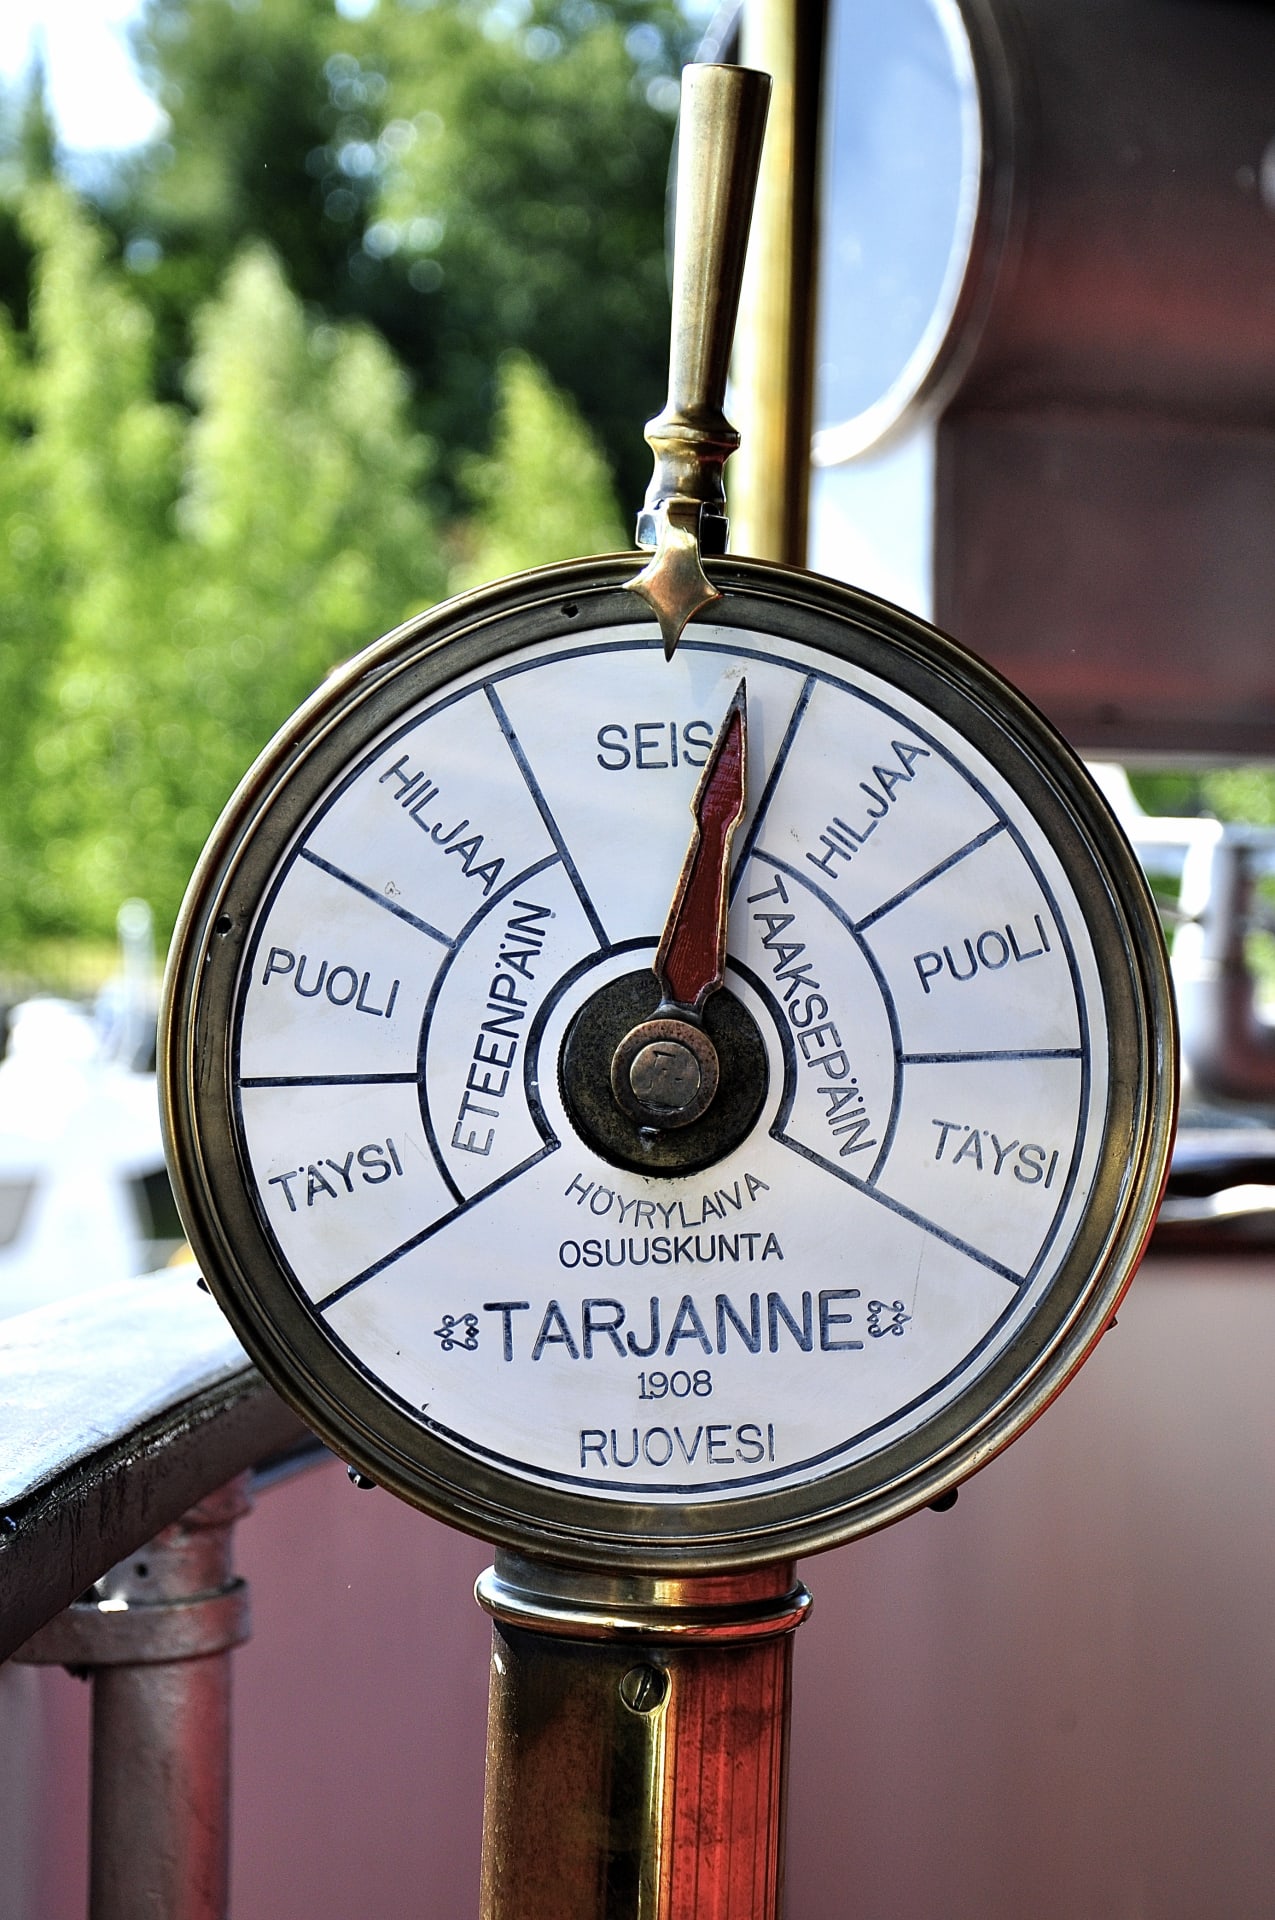 Travel aboard a real steamship.